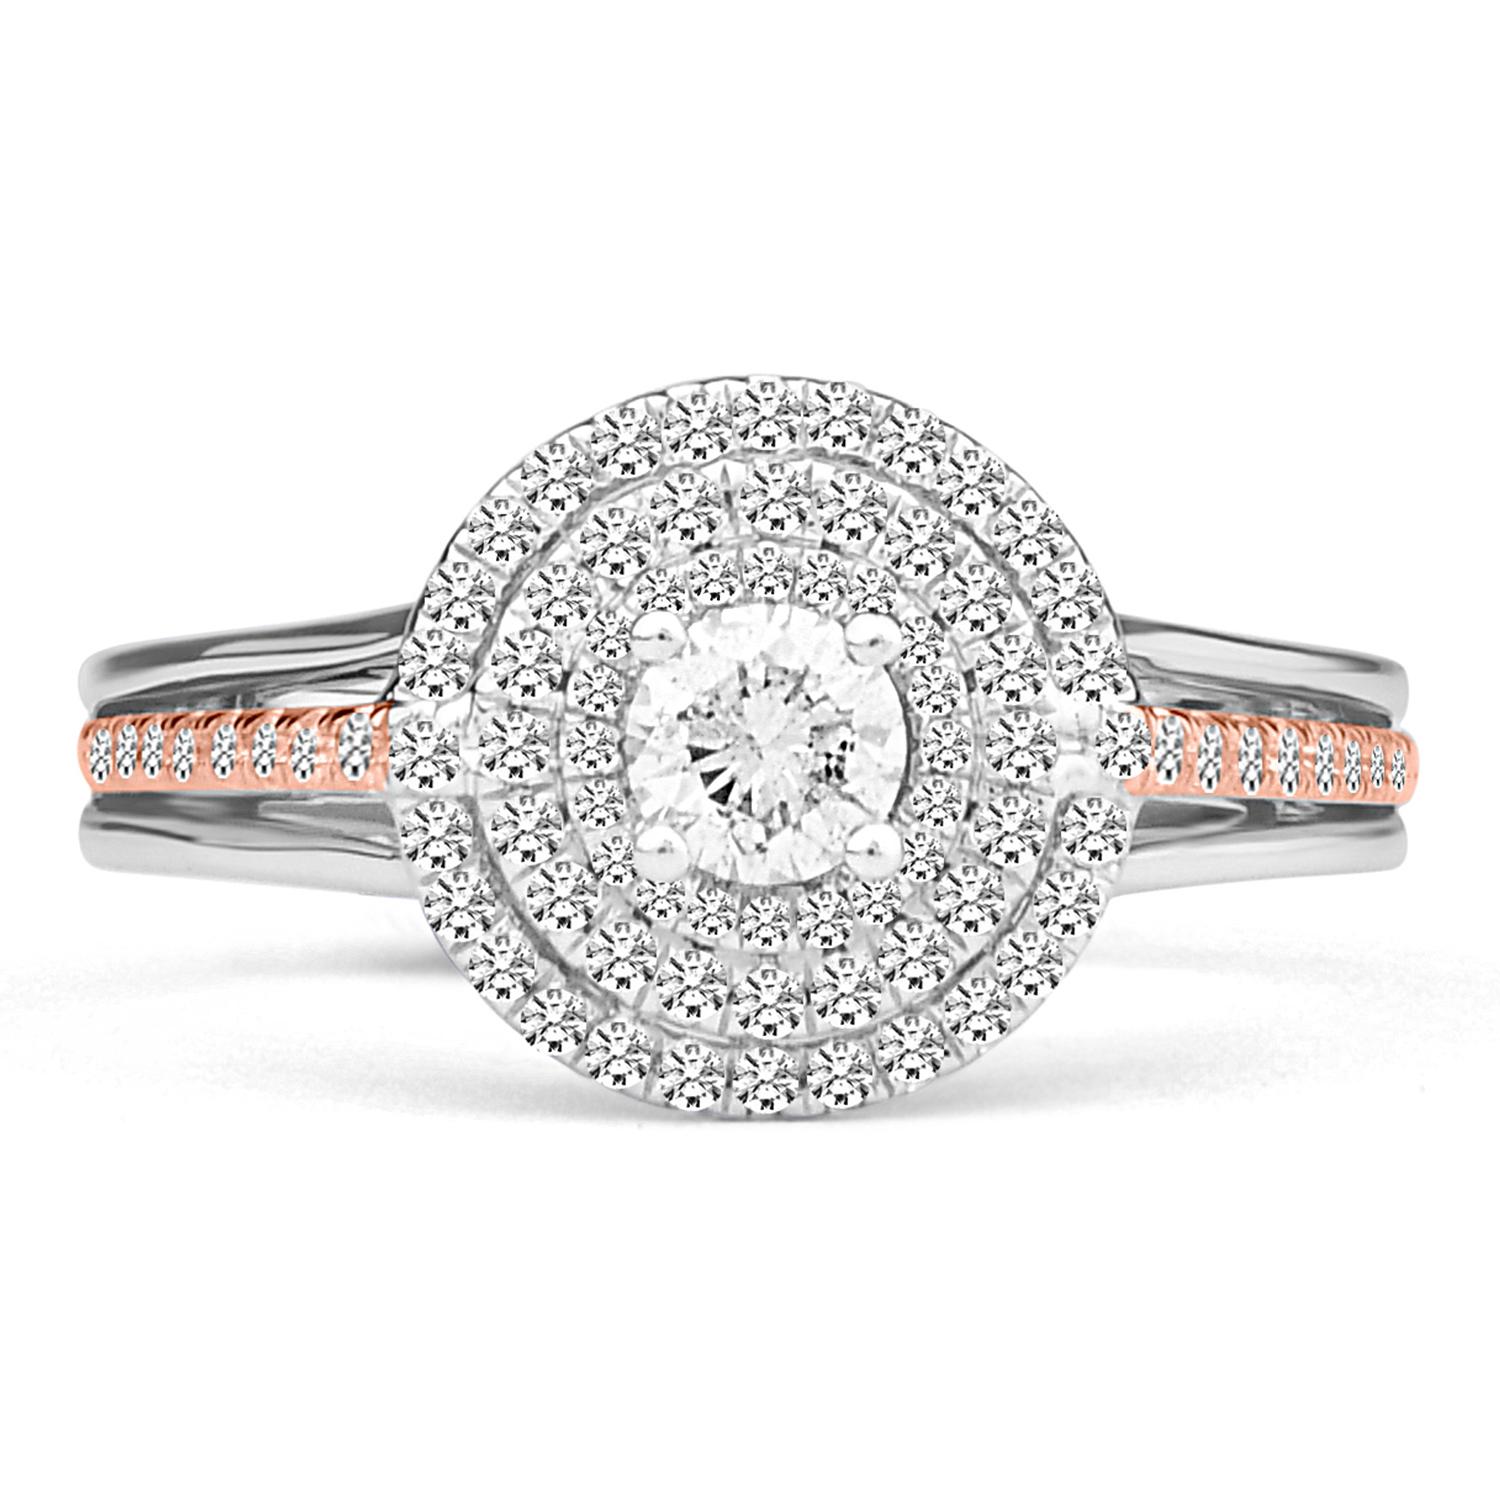 IGI CERTIFIED. Make a statement with this stunning piece of jewelry. Each certified diamond is carefully set. All Diamonds are high quality and ethically sourced.
Cttw : 0.76 ctw
Kt : 14kt
Stone Clarity : G-H/I2-I3
